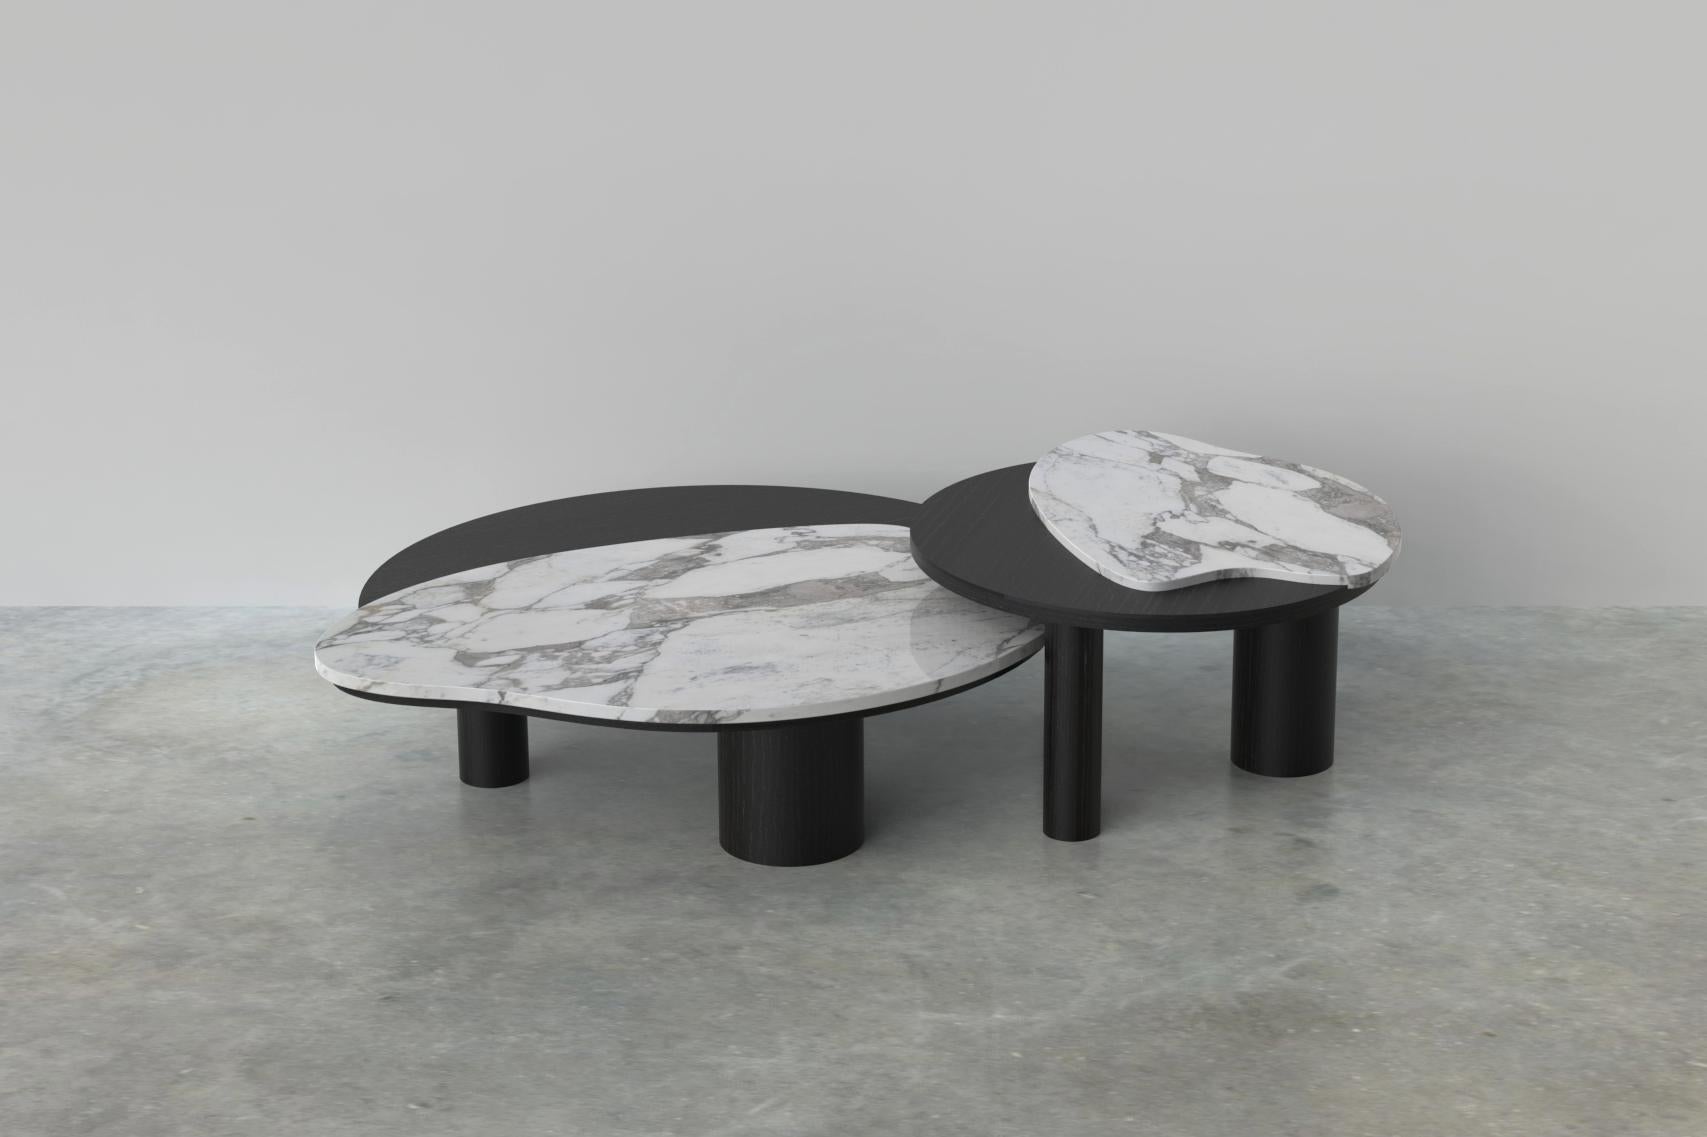 Bordeira Nesting Coffee Table, Contemporary Collection, Handcrafted in Portugal - Europe by Greenapple.

Designed by Rute Martins for the Contemporary Collection, the Bordeira nesting coffee table was designed to add the essence of nature into the